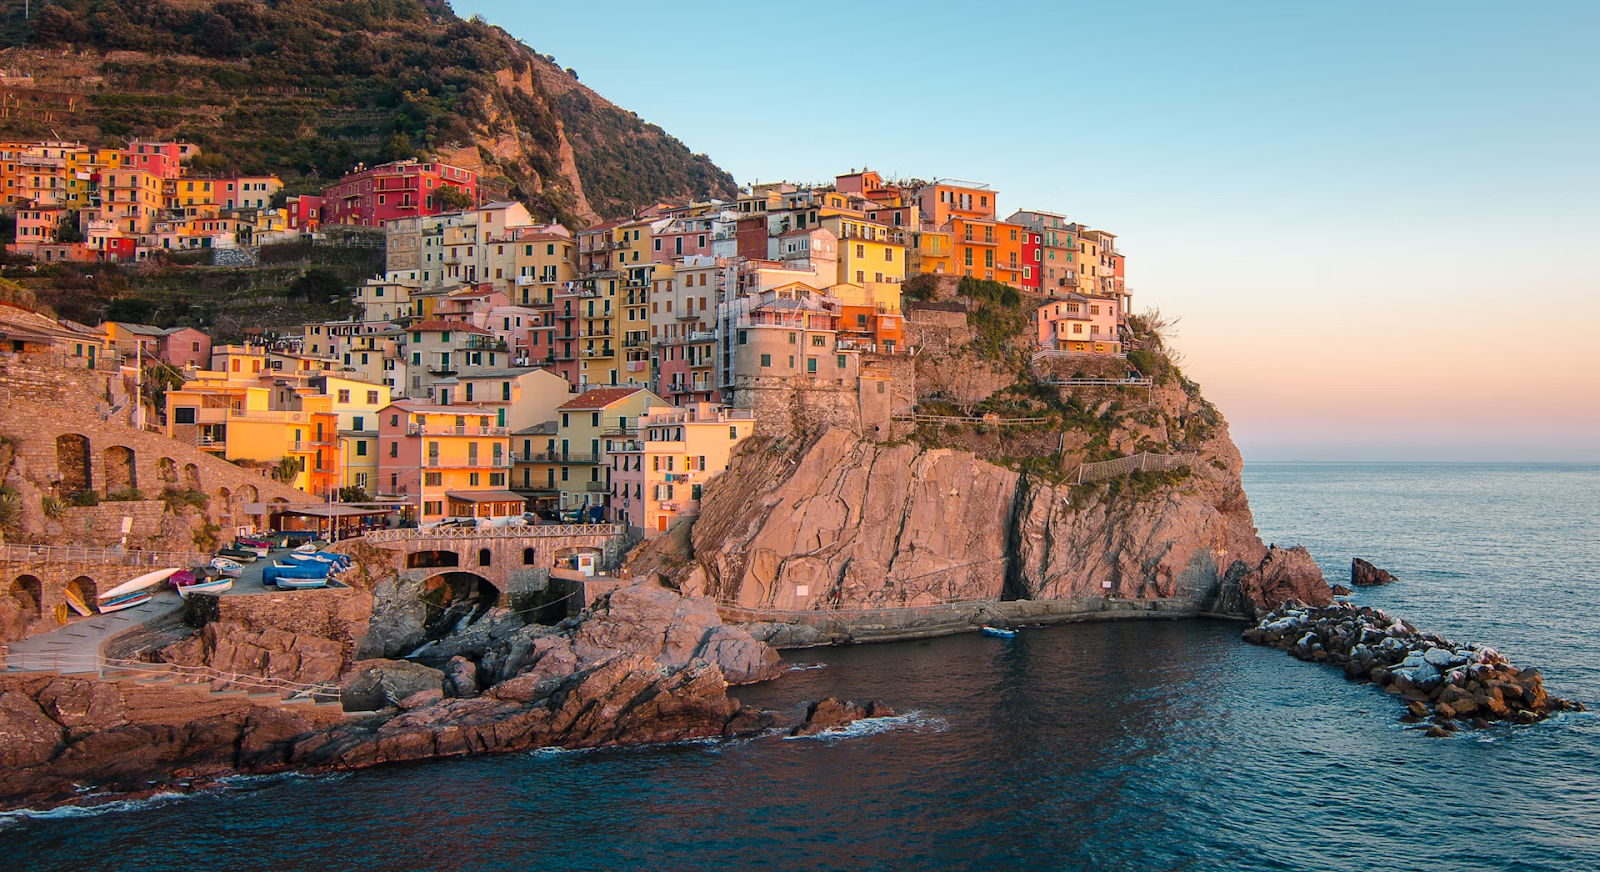 Picture shows view of Cinque Terre in Italy which is famous for its beautiful landscape and mountains, overlooking Mediterranean sea 